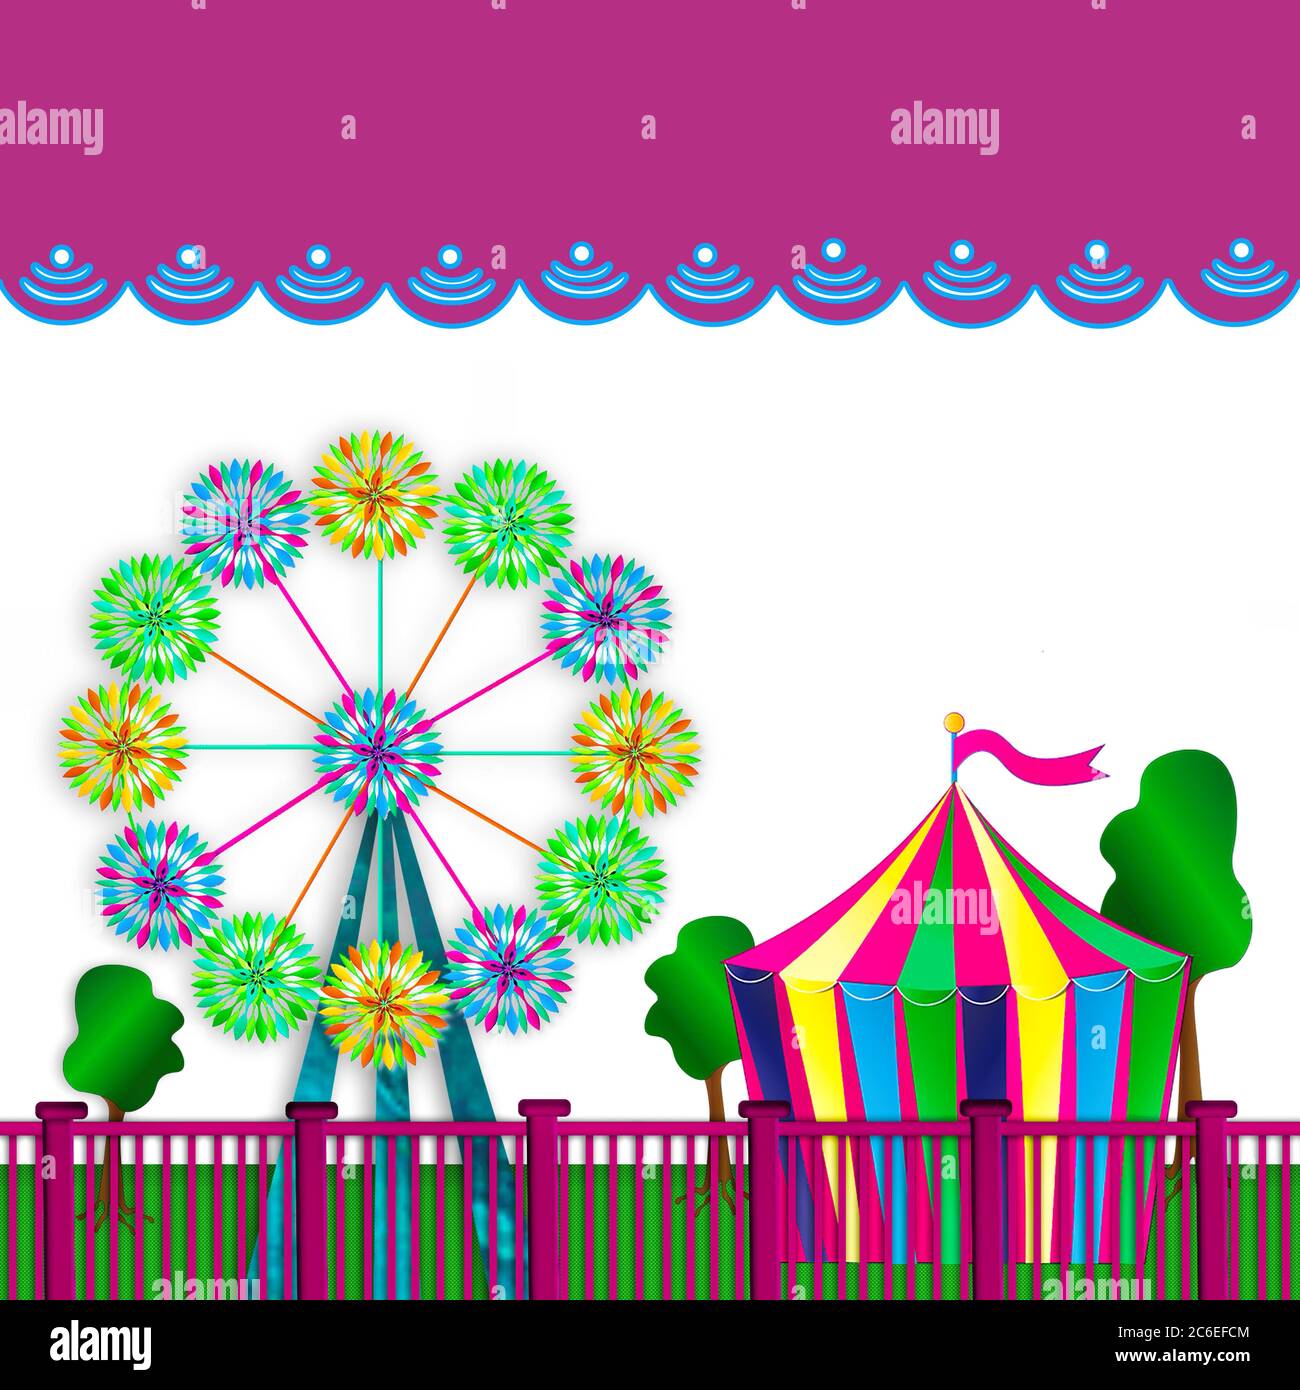 Fun graphic background resembling an amusement park with spinners for Ferris Wheel and colorful tent.  Text area isolated above image. Stock Photo